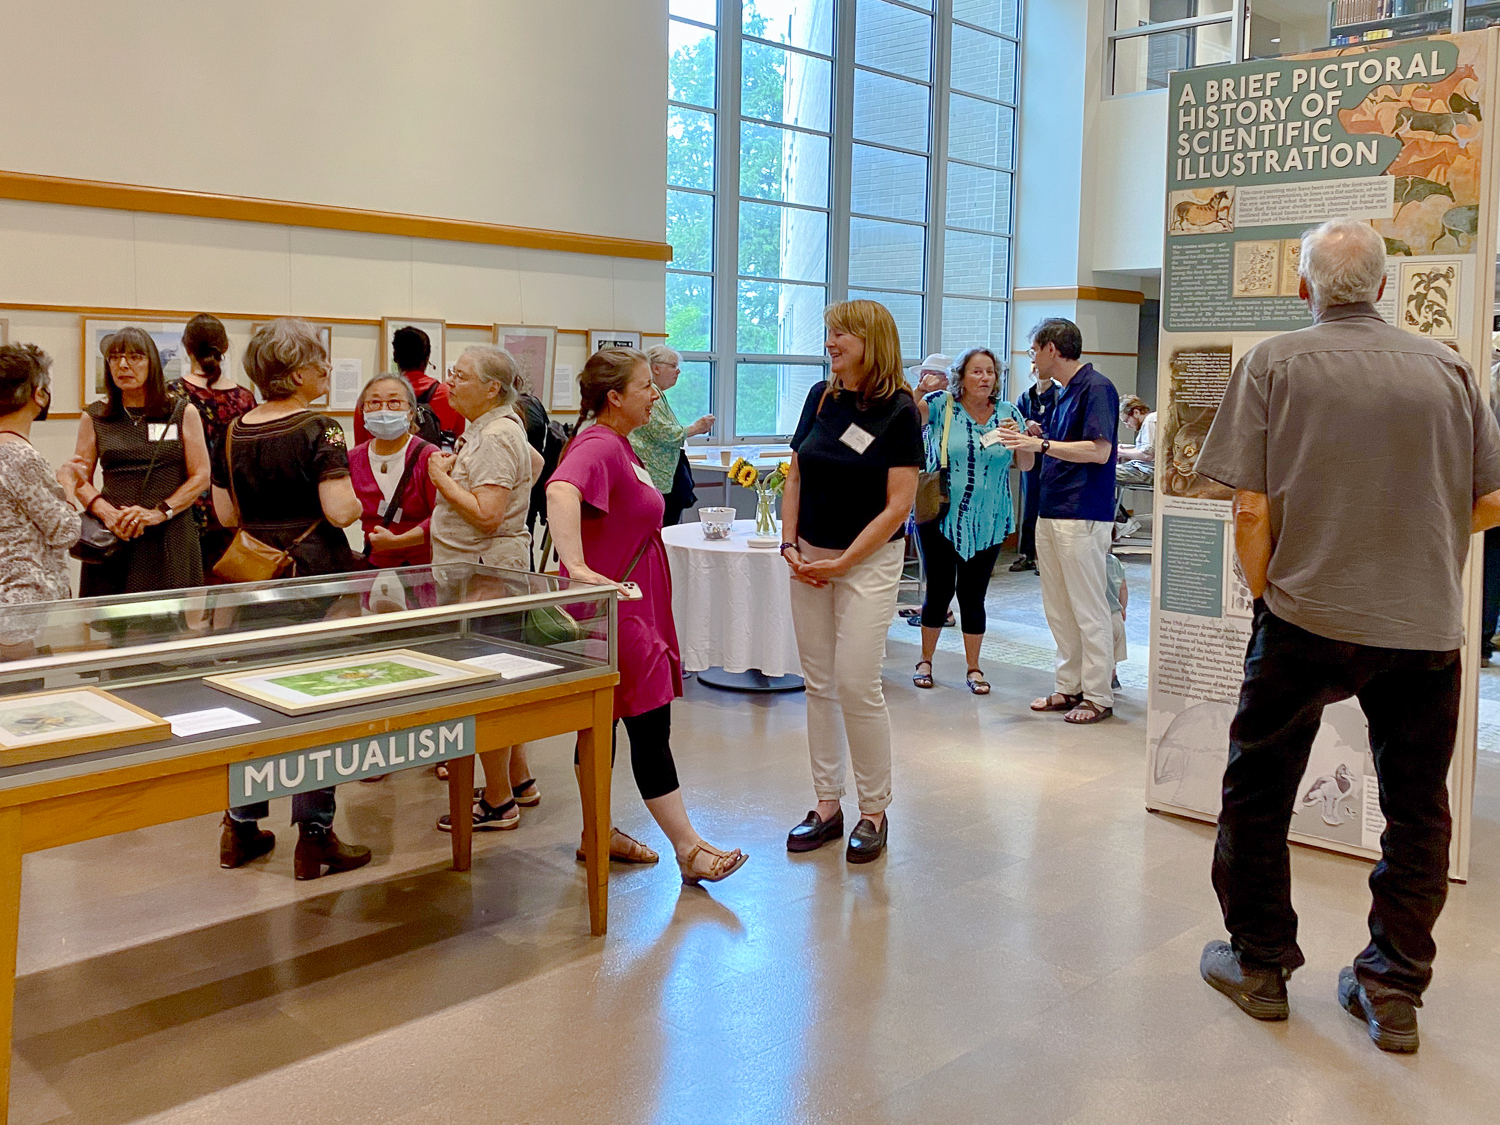 An image of people at an exhibit reception at the Mann Library Gallery